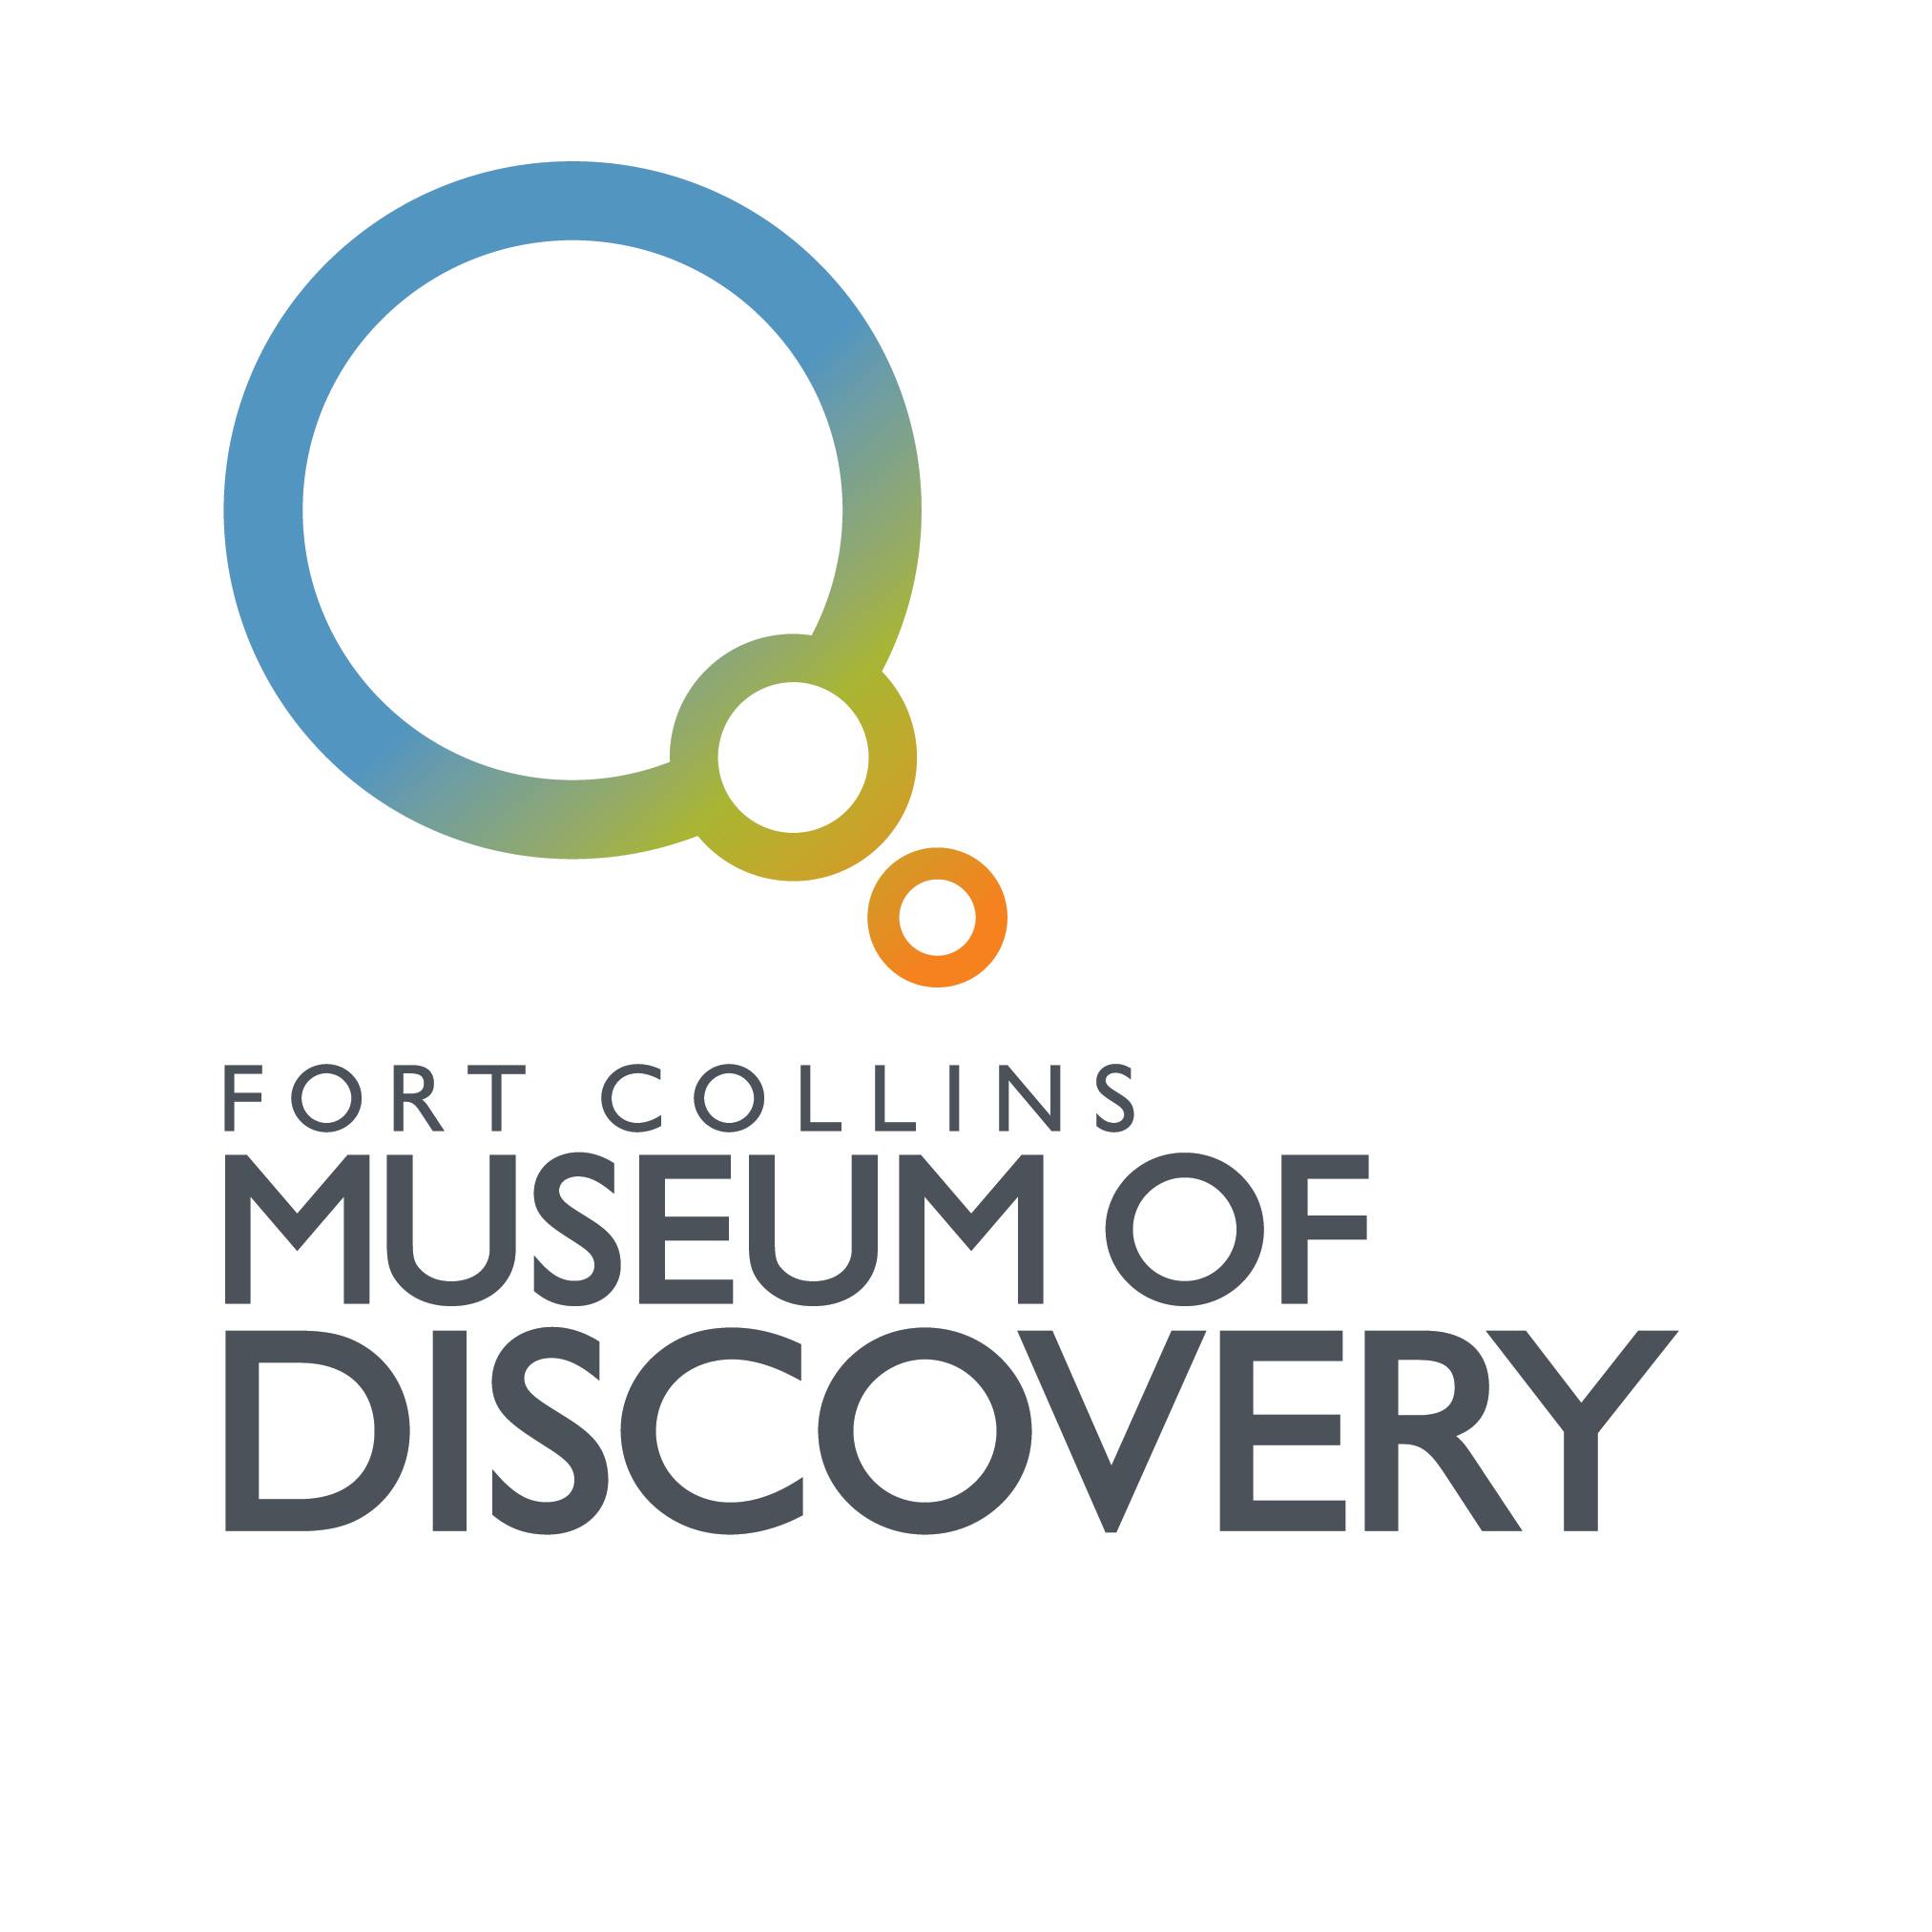 Fort Collins Museum of Discovery Logo